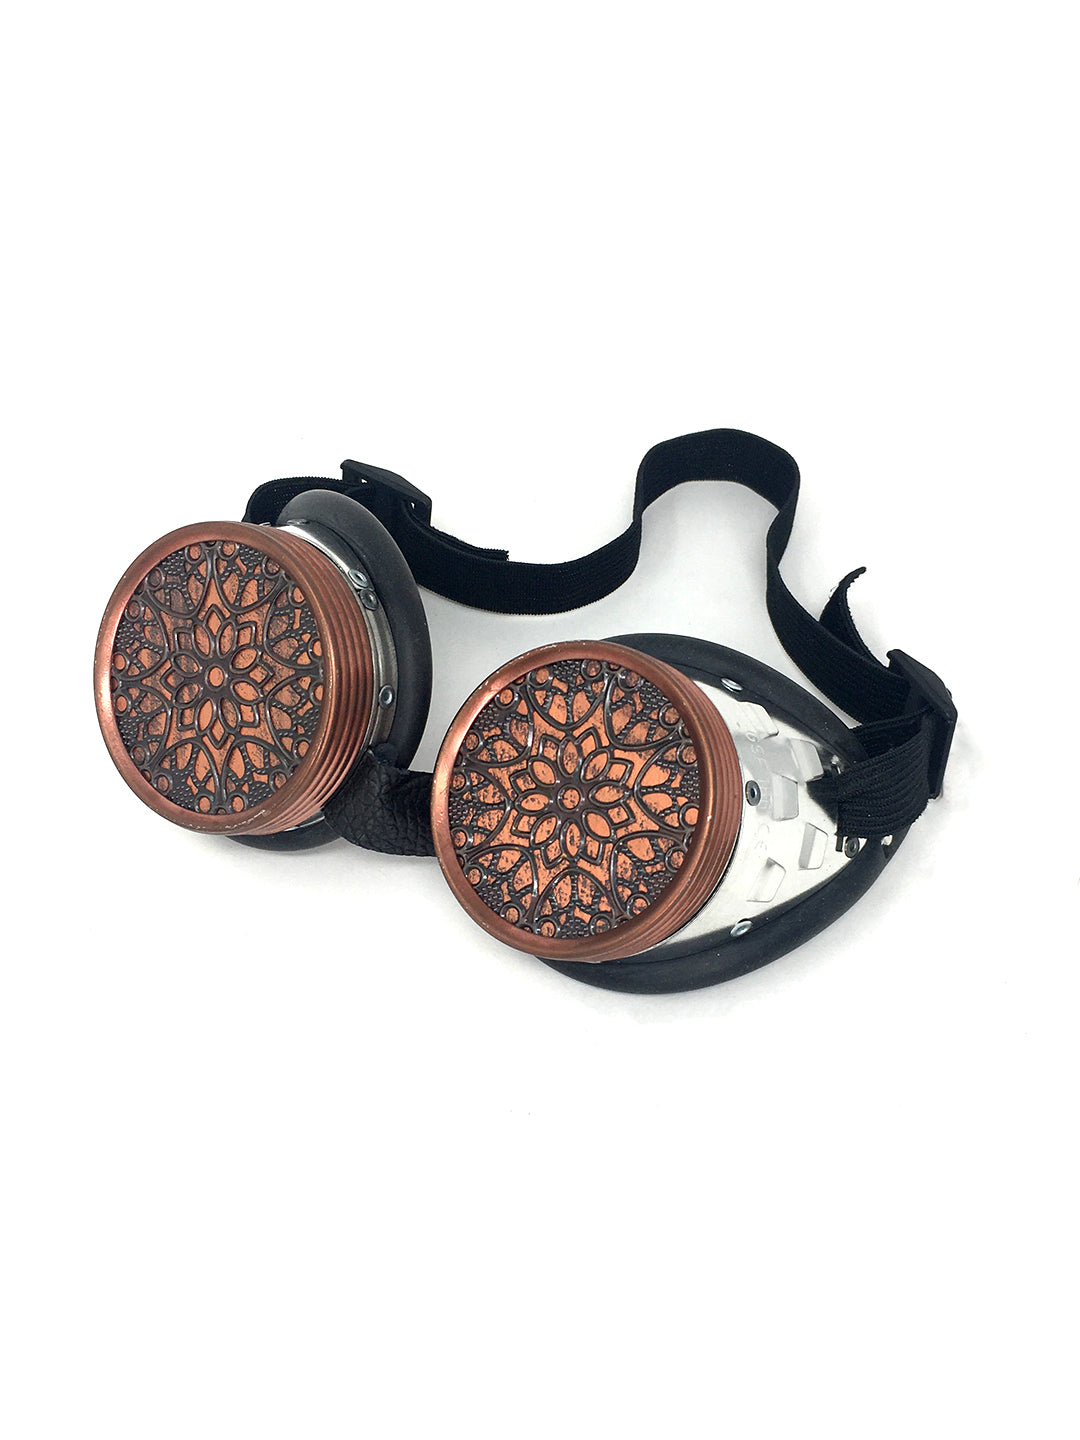 Metal Goggles with Copper Filigree